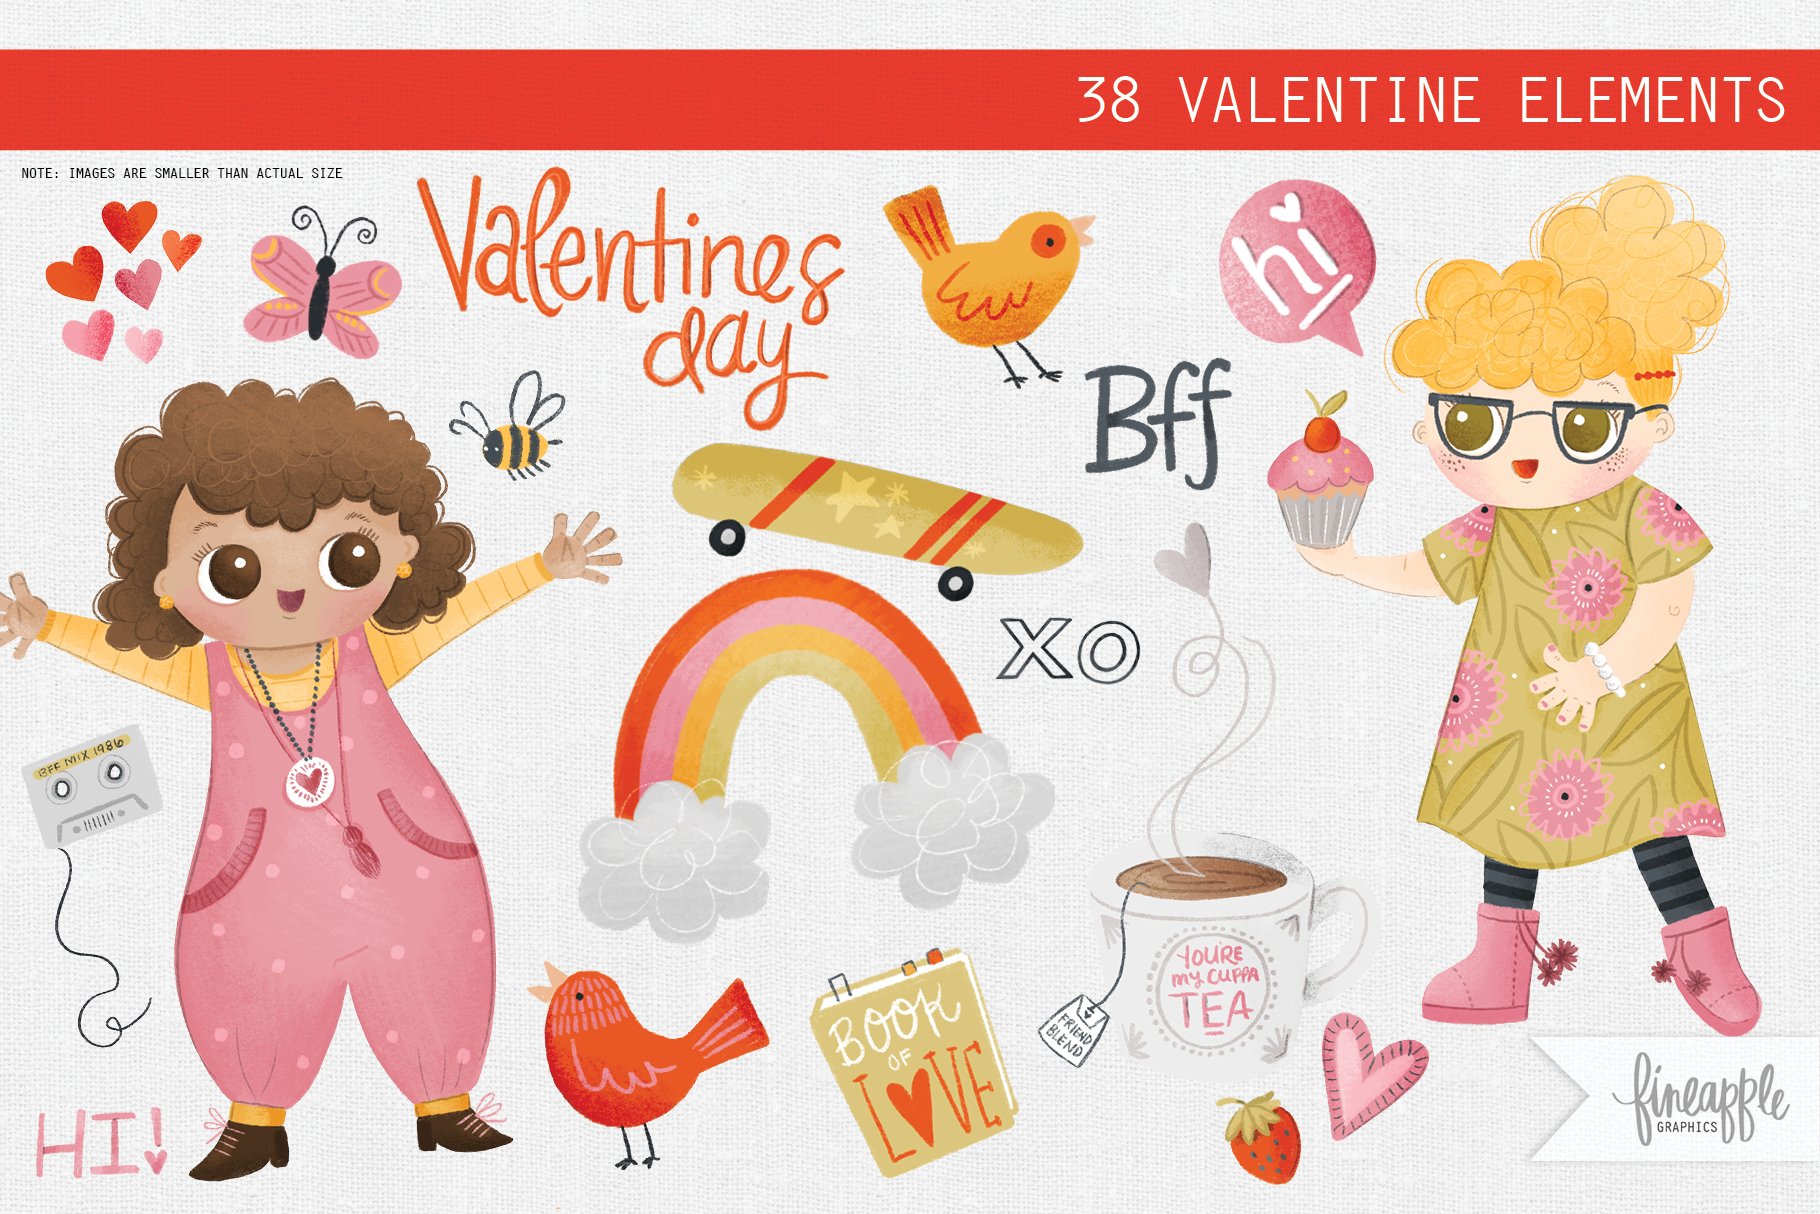 Cute love elements to create a full Valentine's composition.